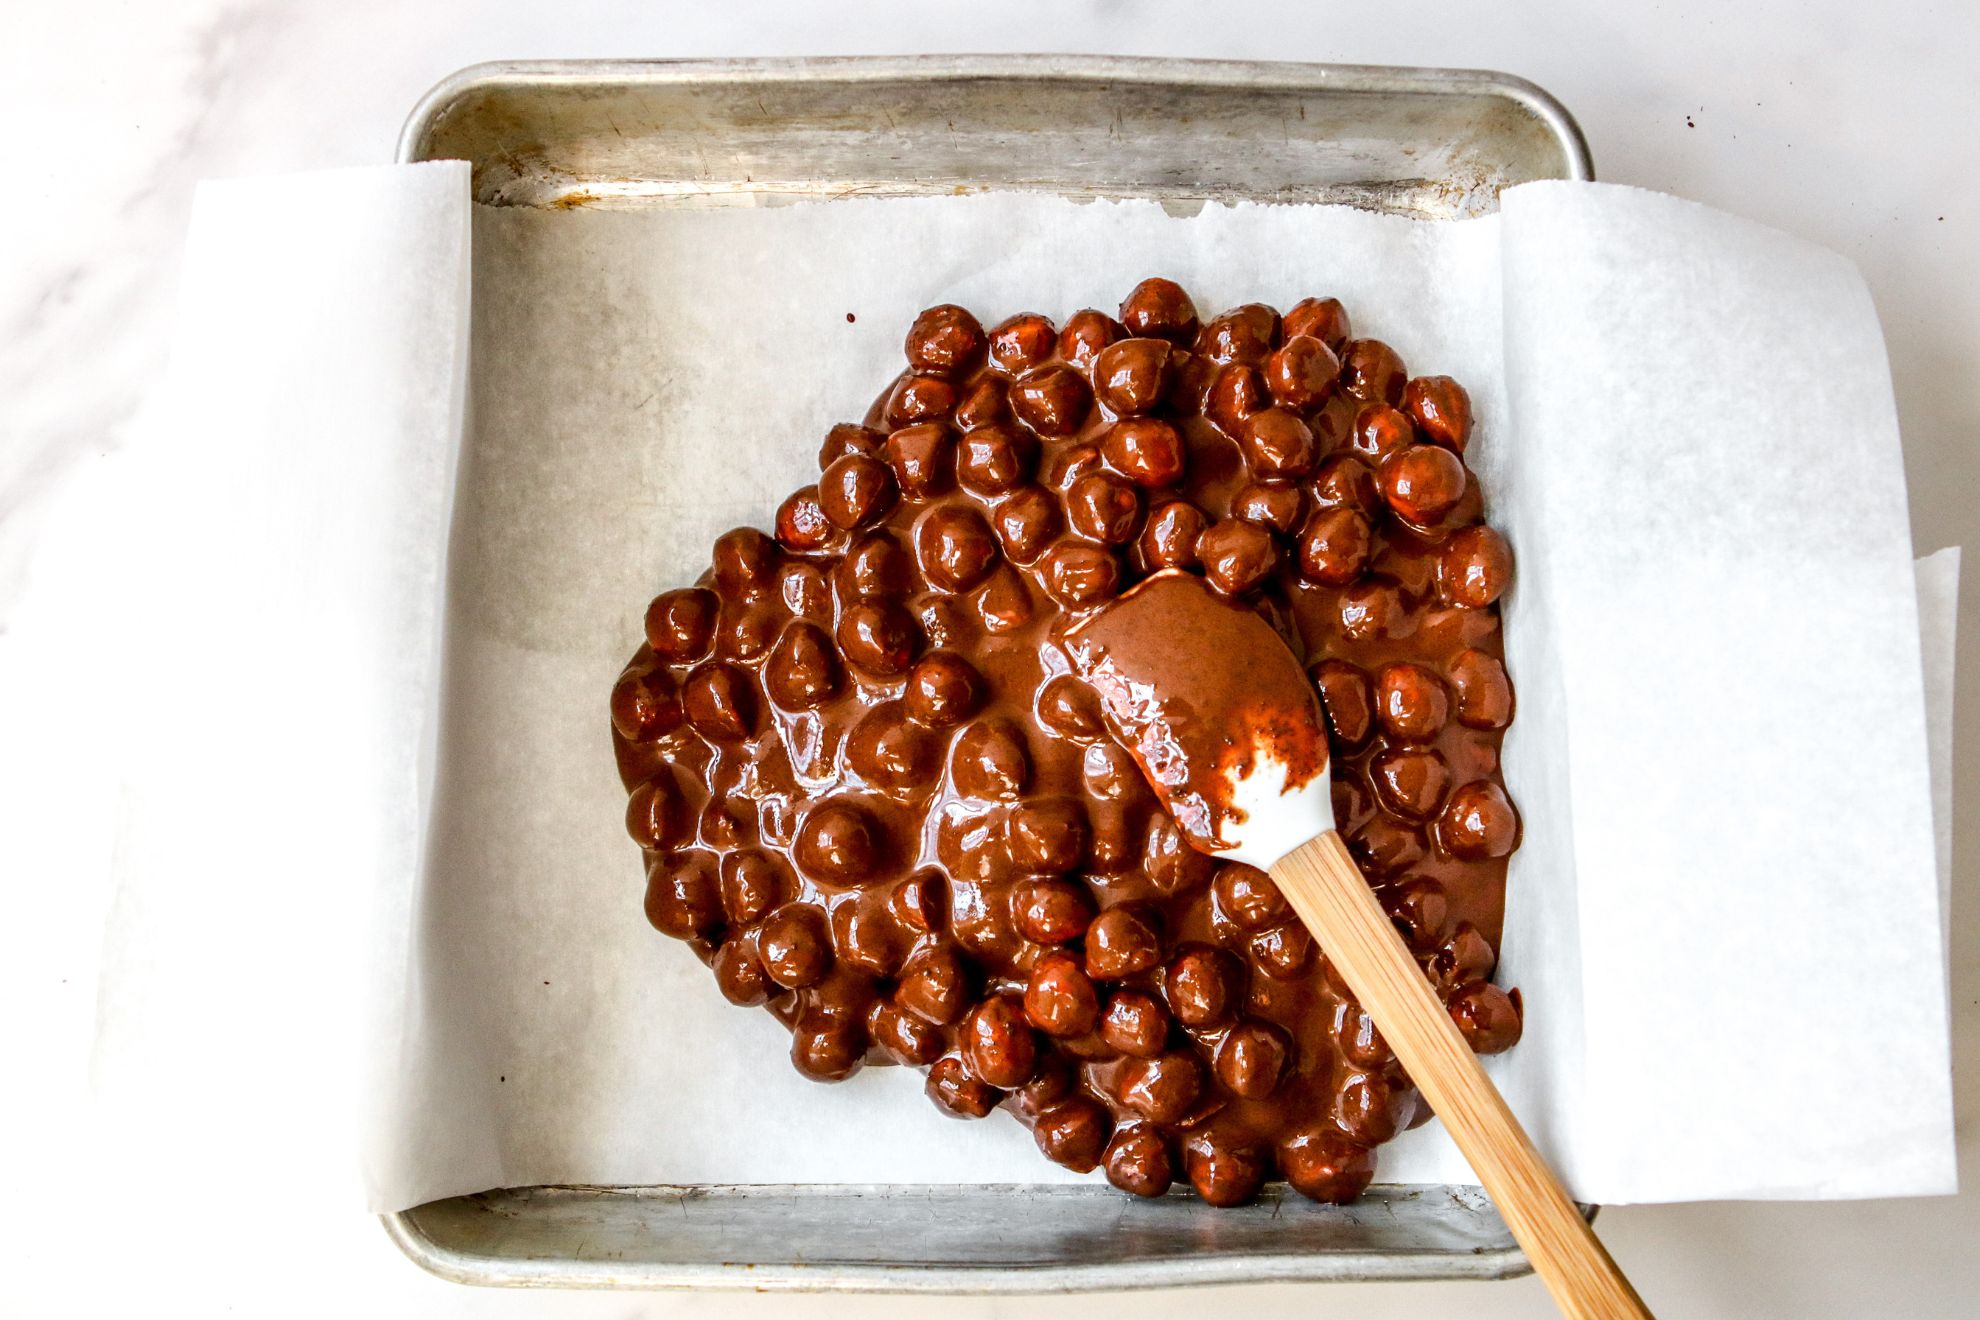 This is an overhead horizontal image of a square pan lined with white parchment paper. In the pan, on top of the parchment paper are hazelnuts coated in chocolate in the center and to the right of the pan. A small white spatula is coated in chocolate and lying on top of the mixture with the wooden handle leaning against the side of the pan, to the bottom right corner of the image. The pan sits on a white marble counter.